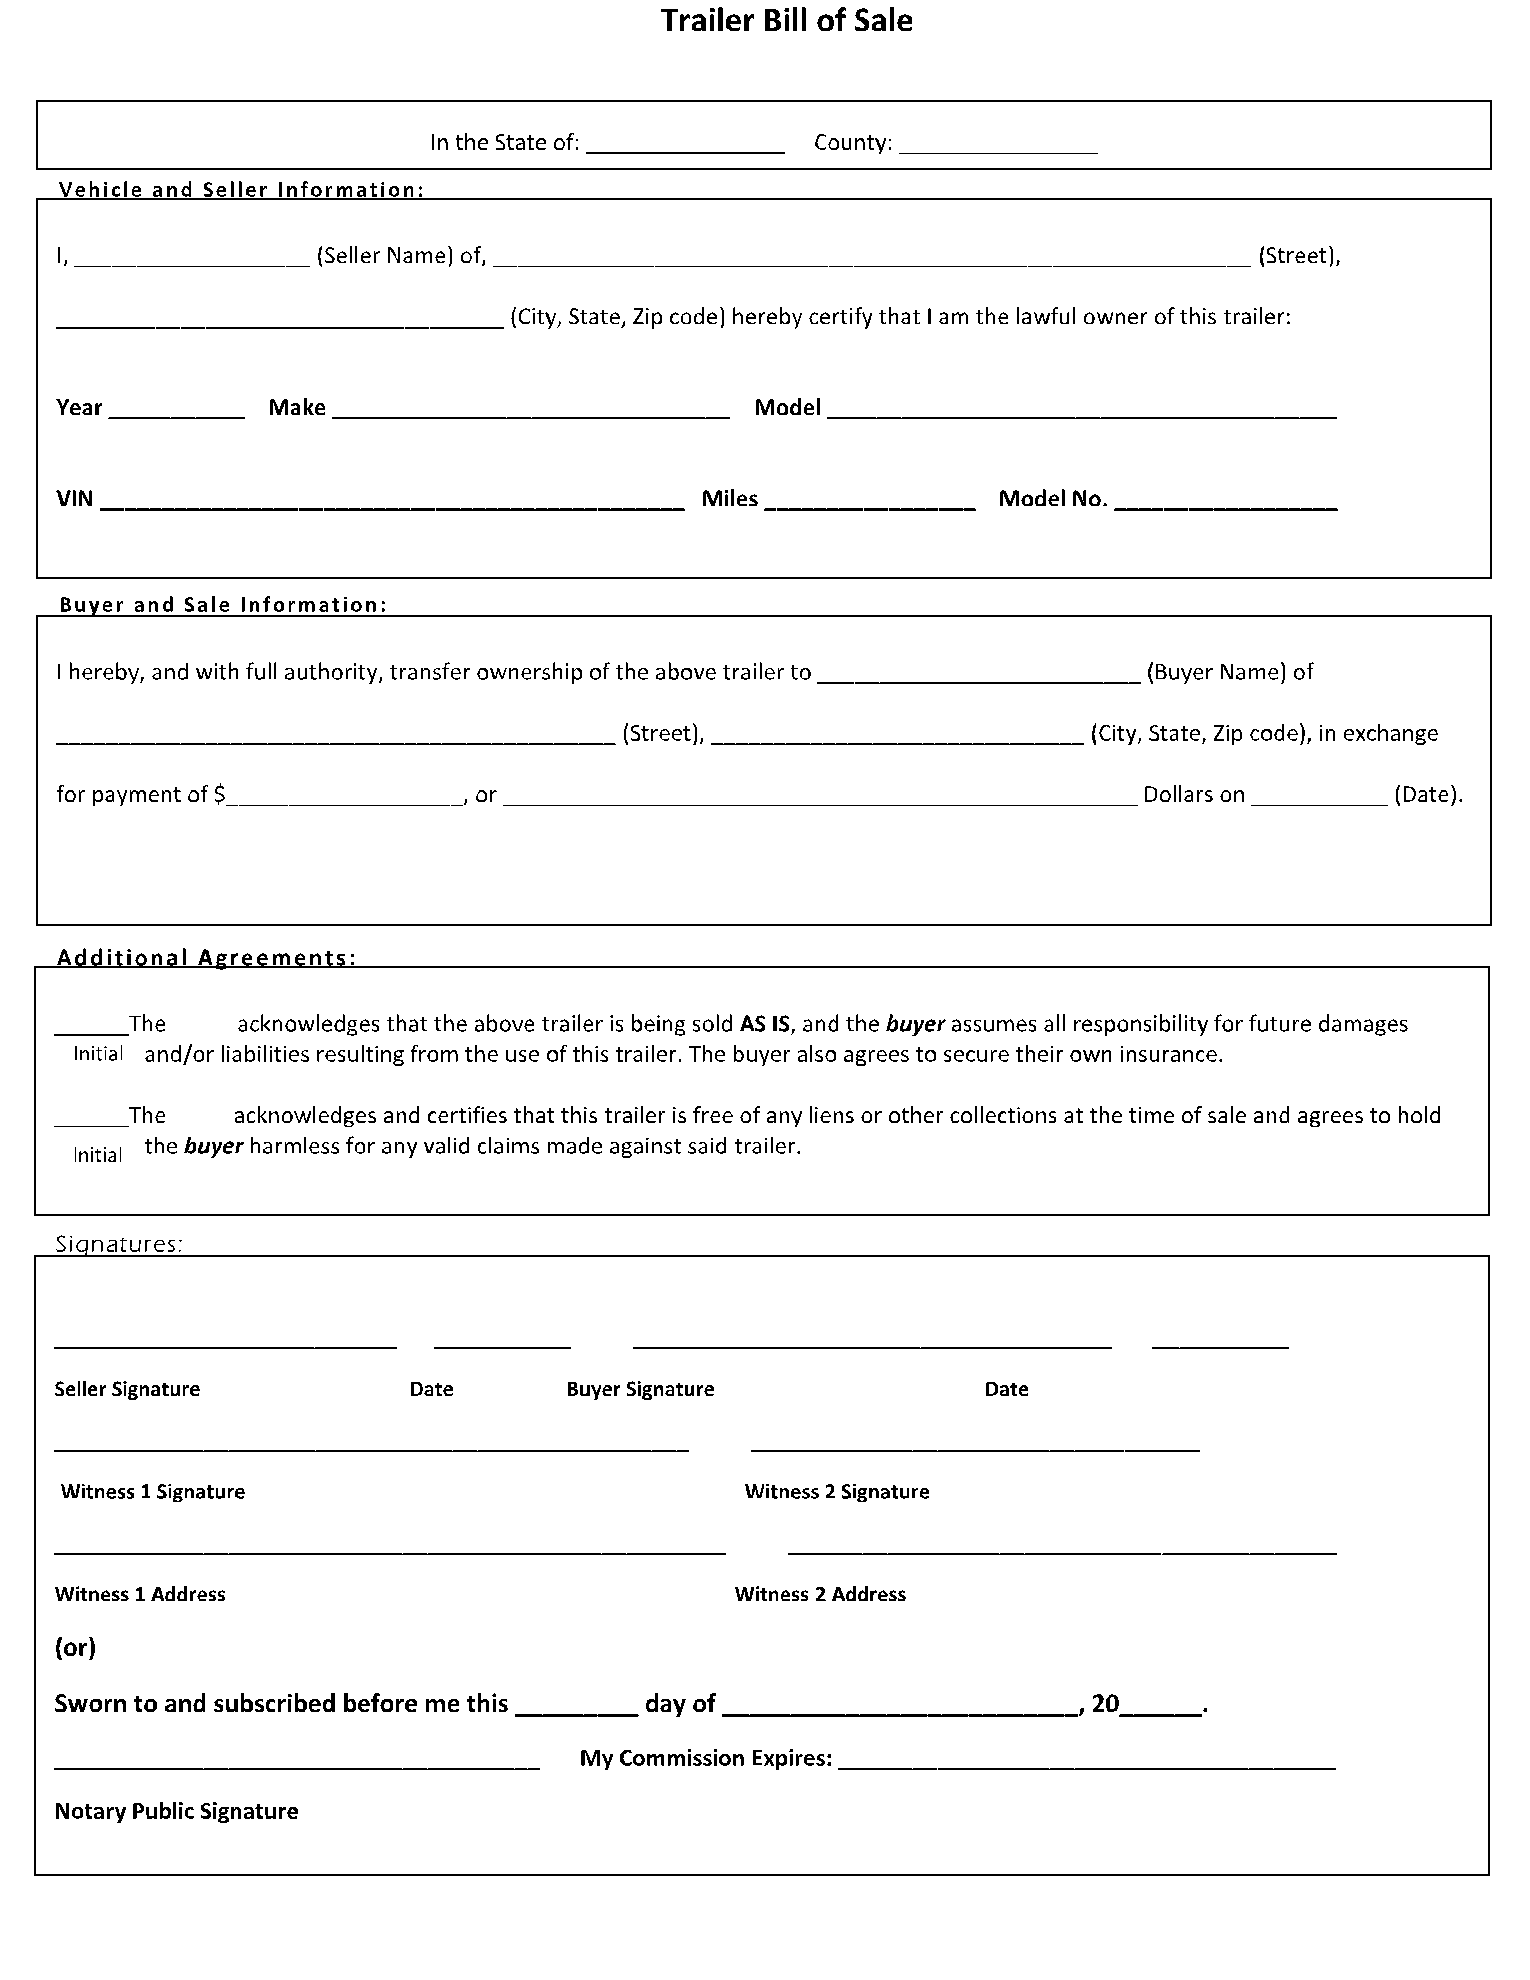 Bill of Sale for Trailer